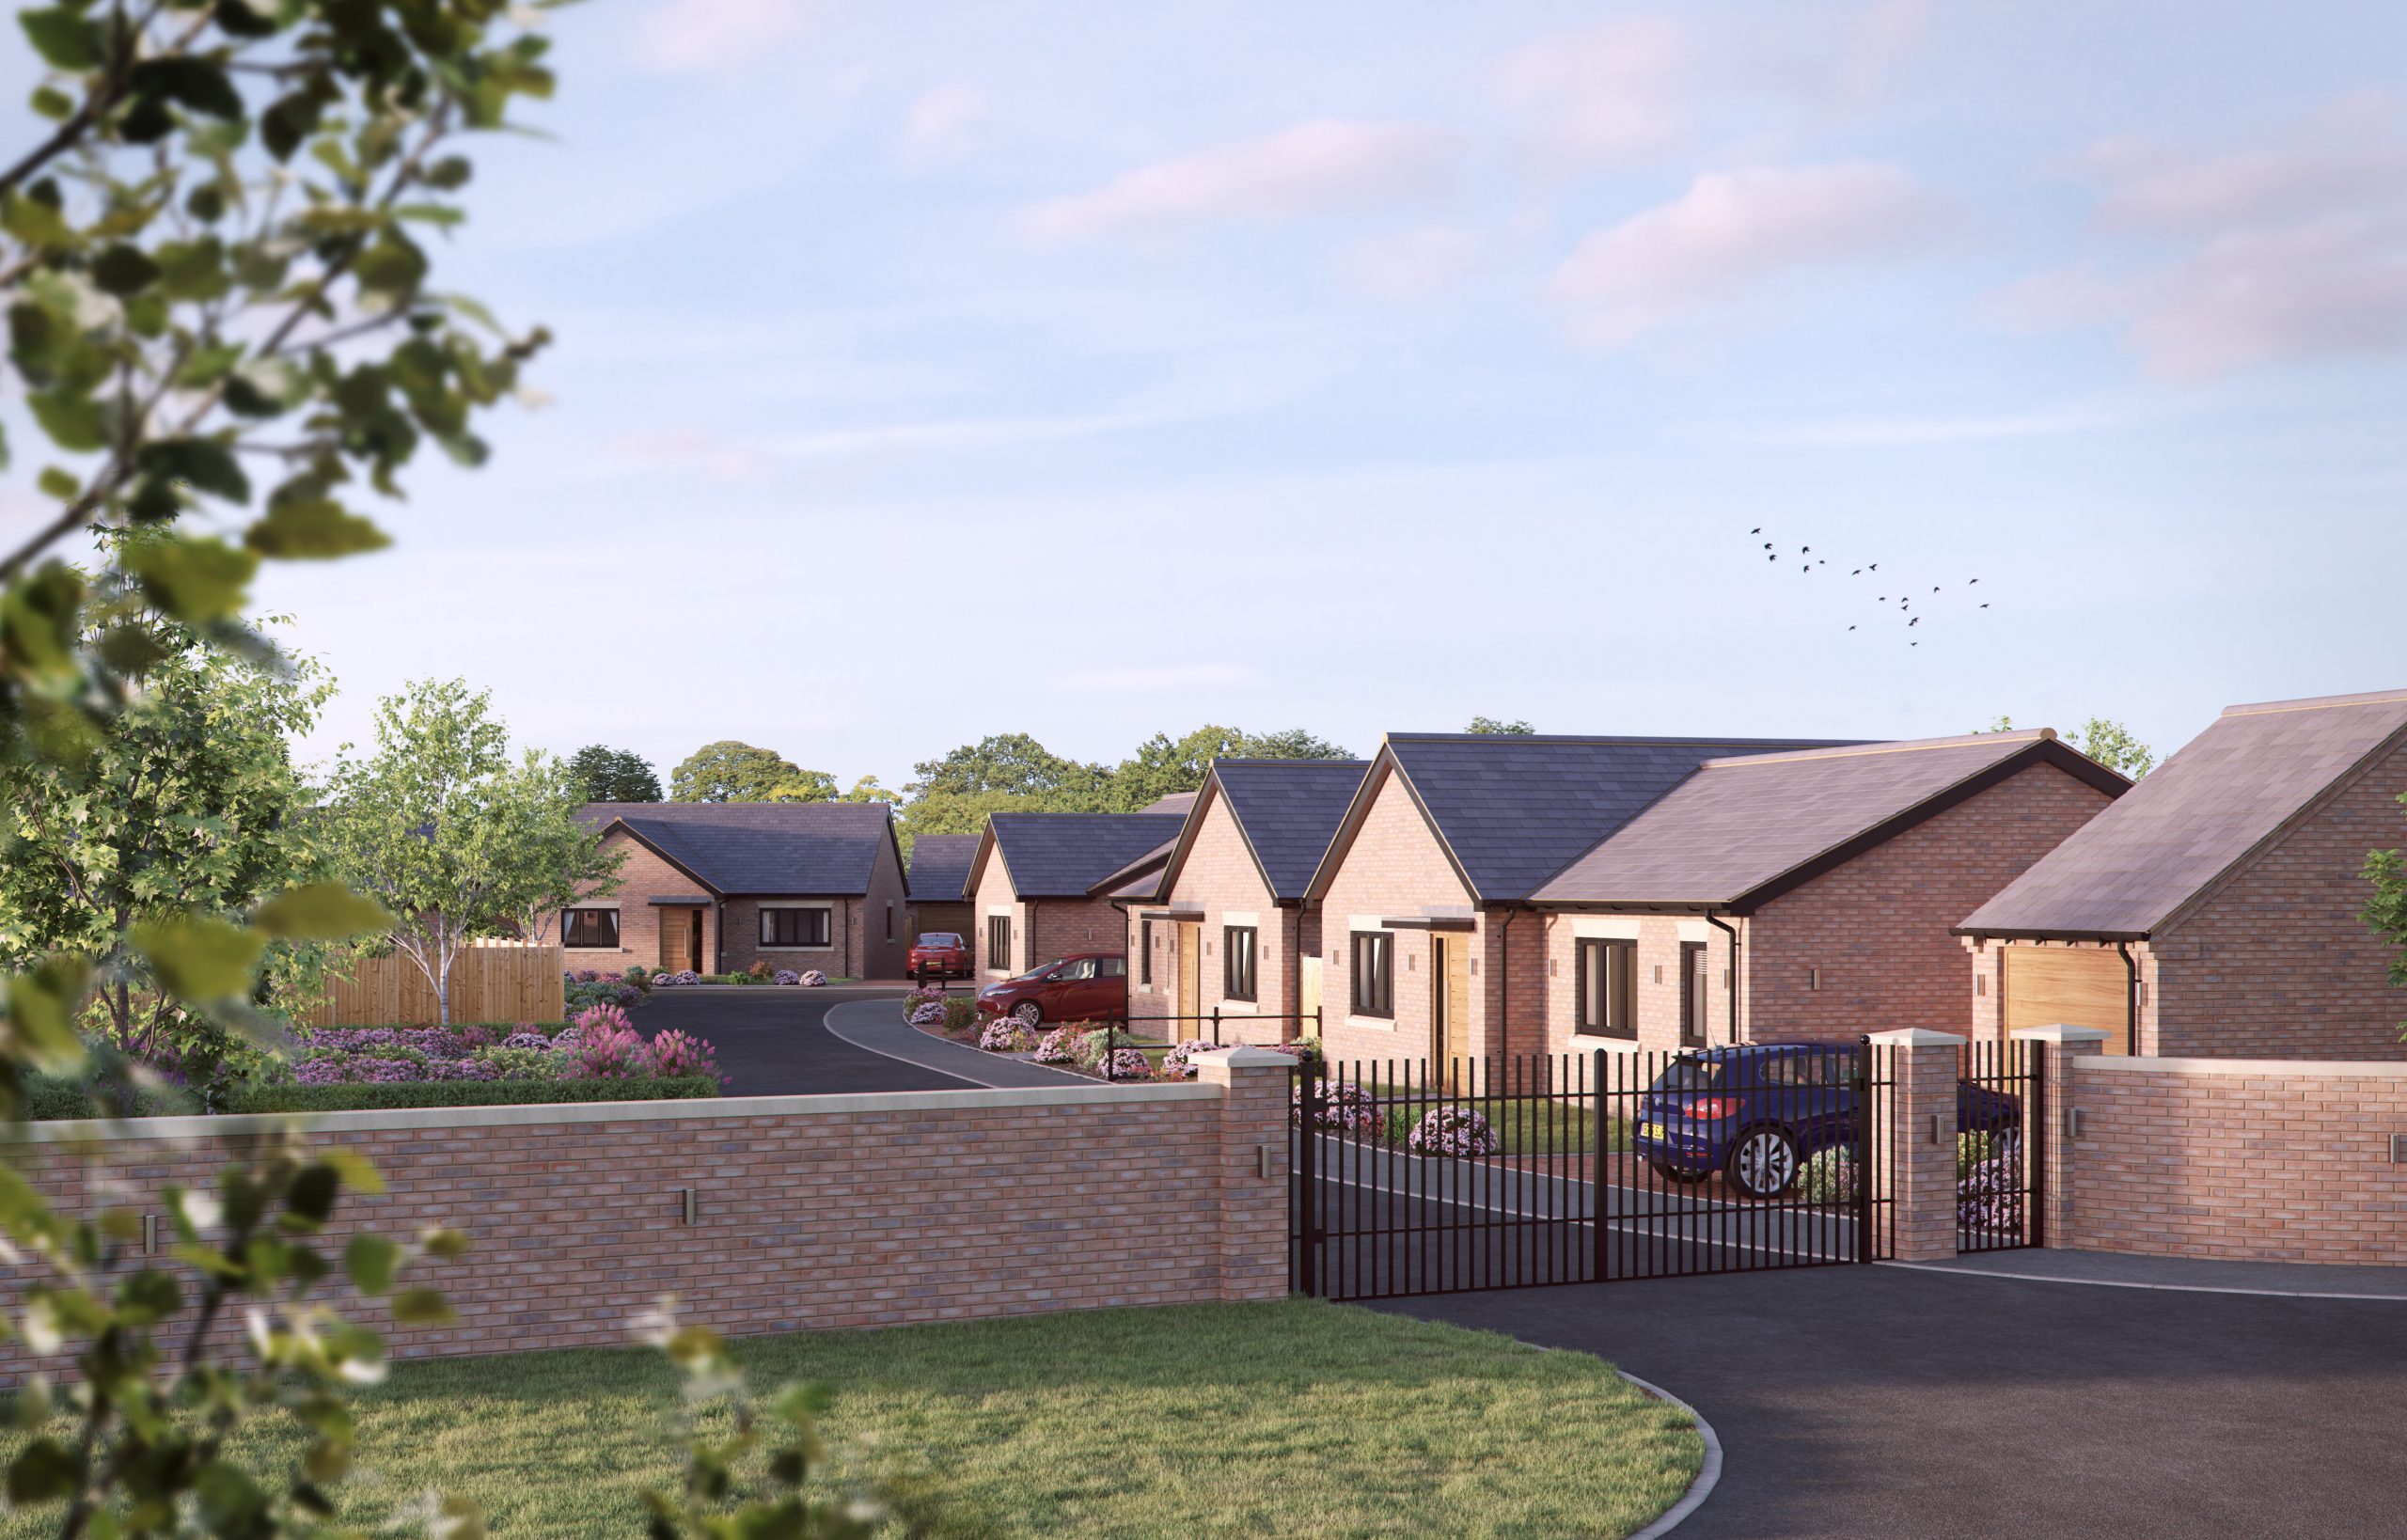 8 luxury bungalows released for sale in Norton in Hales